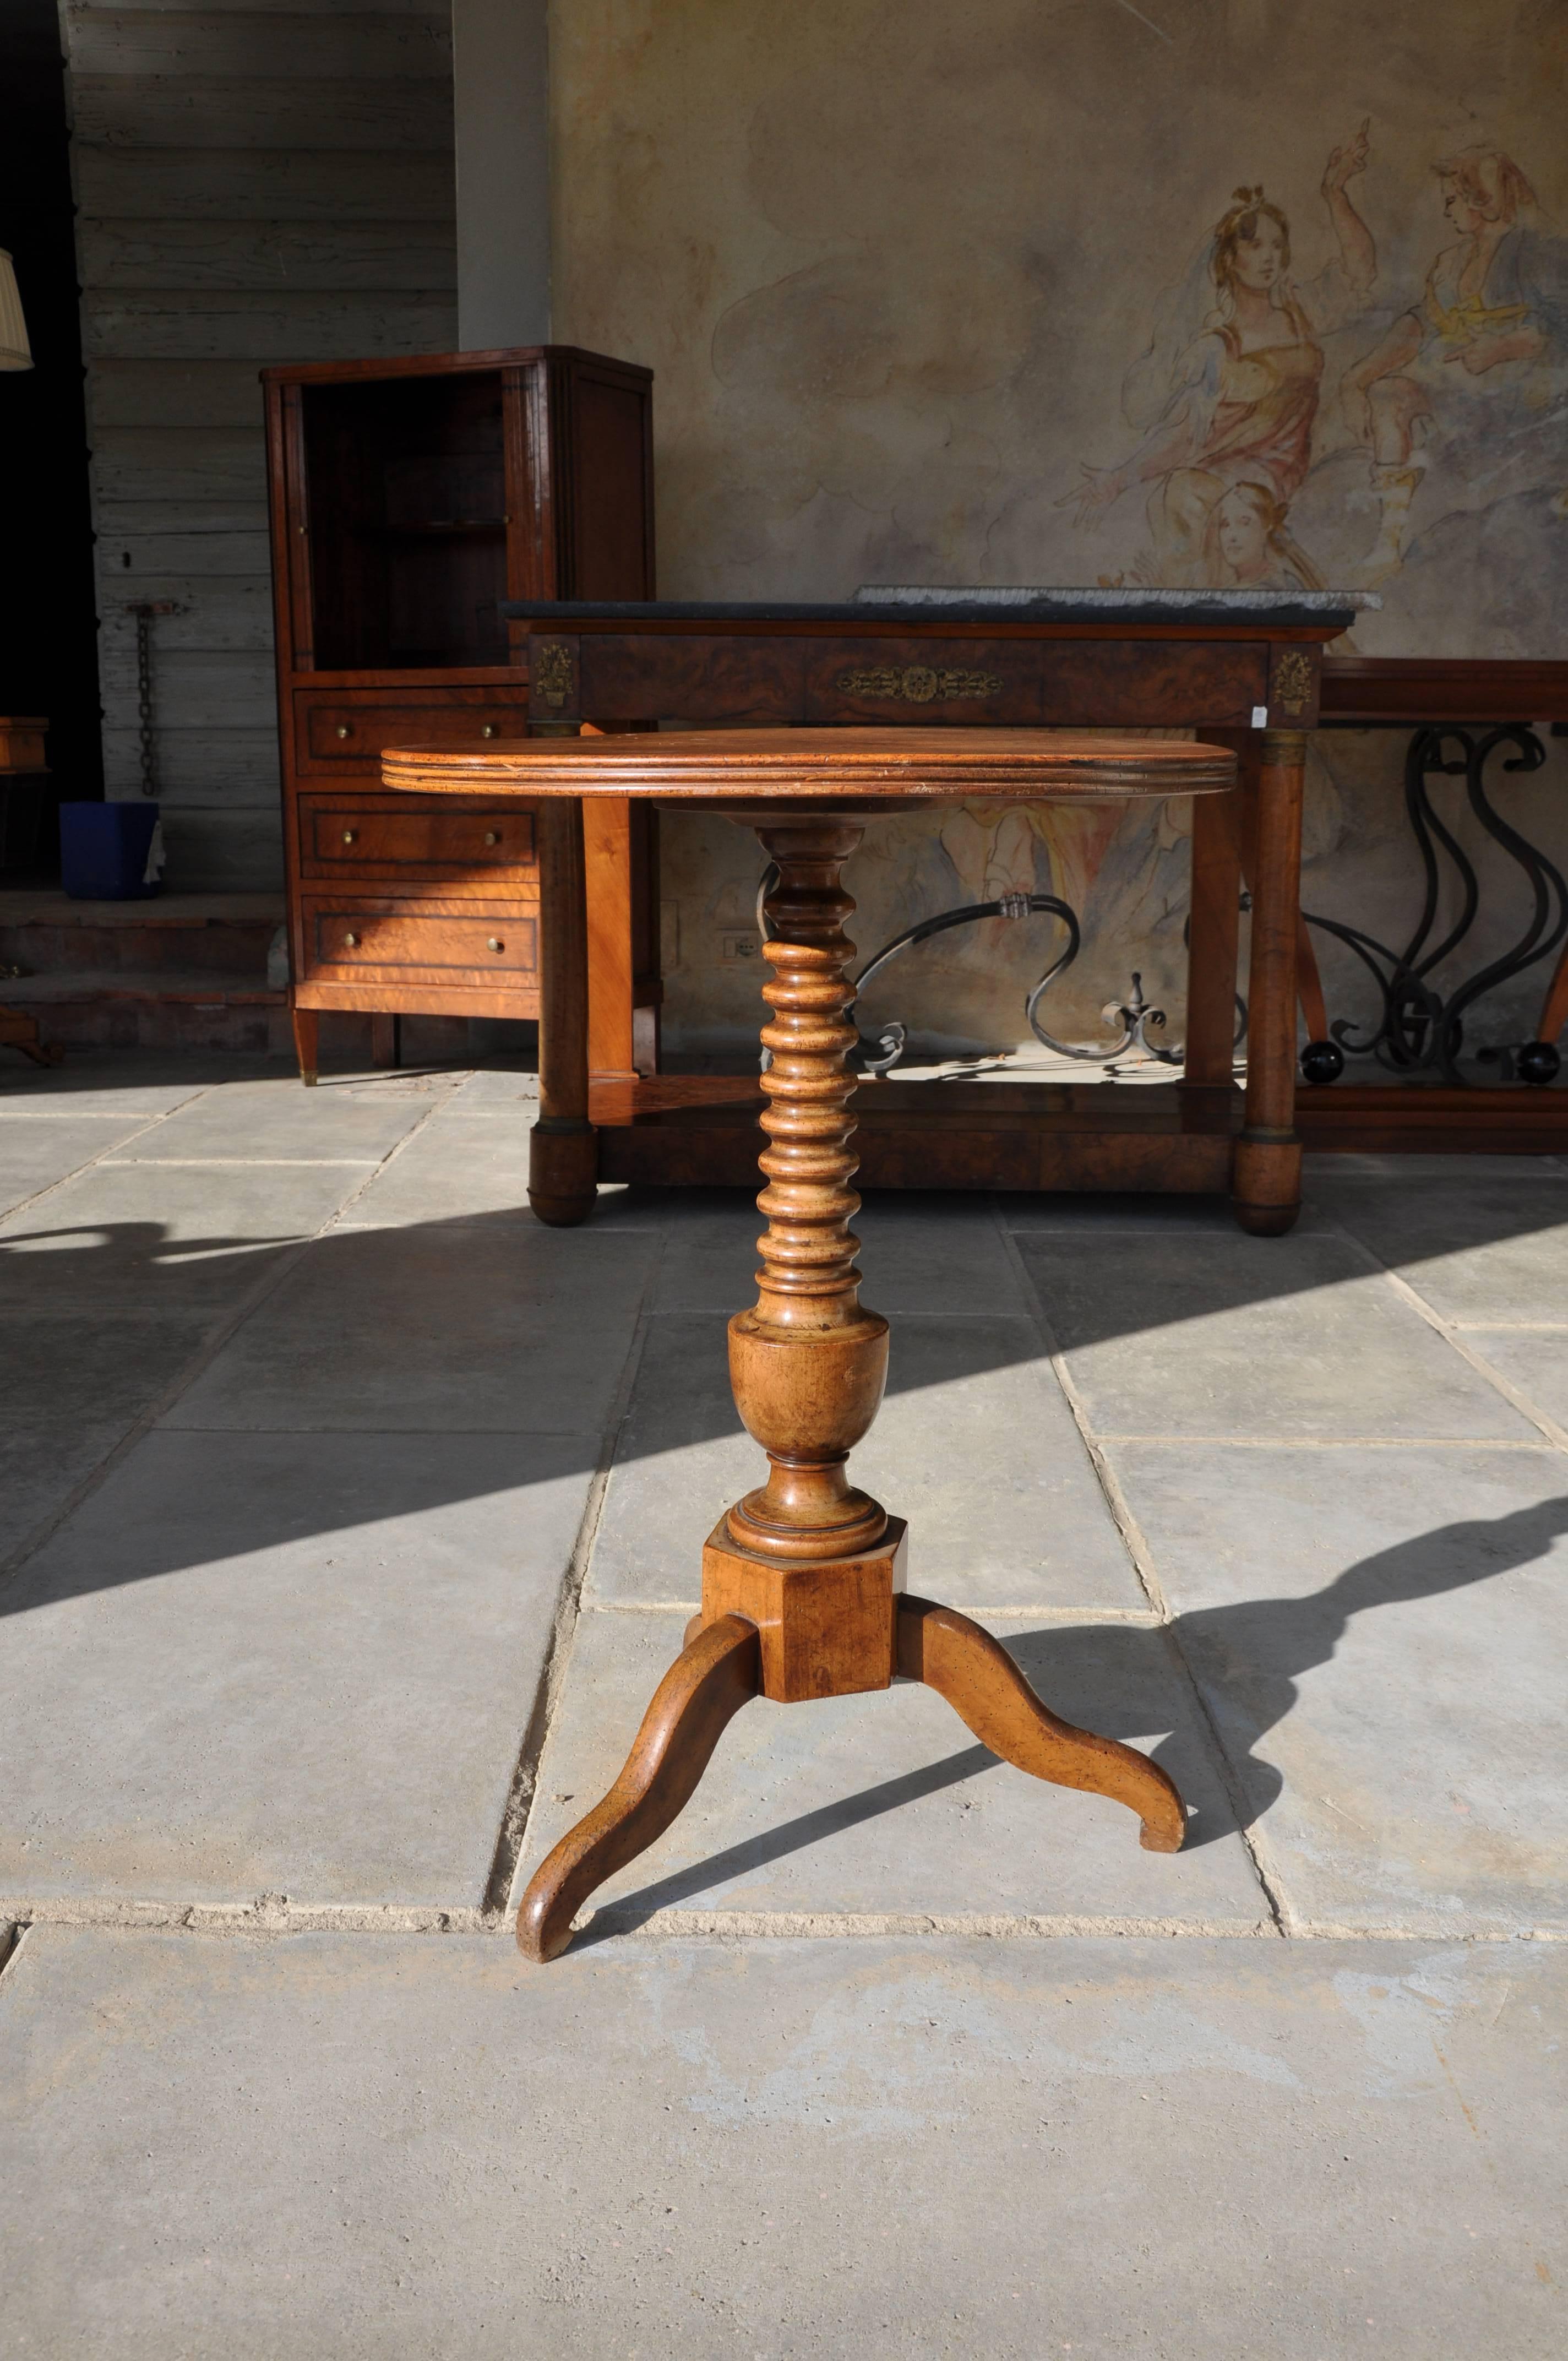 Small round table in blond walnut with centred turned foot, 19th century (1850 - 1870). The table is to be restored. The table diameter is 52cm and the height is 77cm.